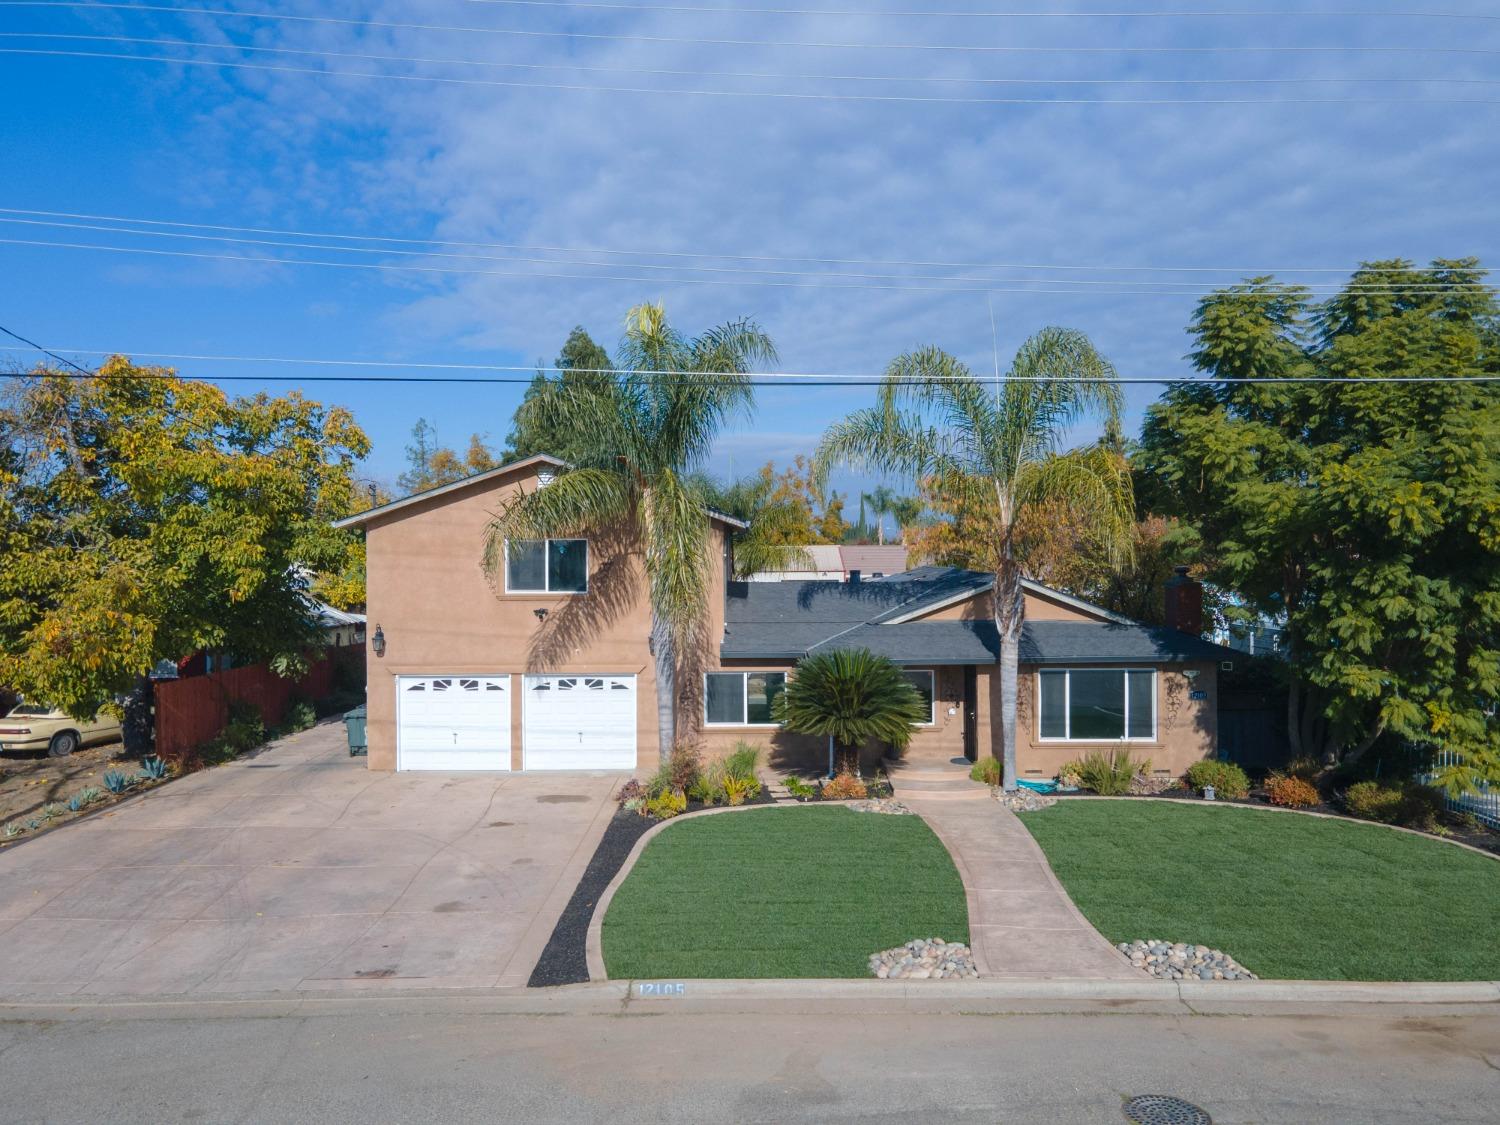 Photo of 12105 Pecan Ave in Waterford, CA